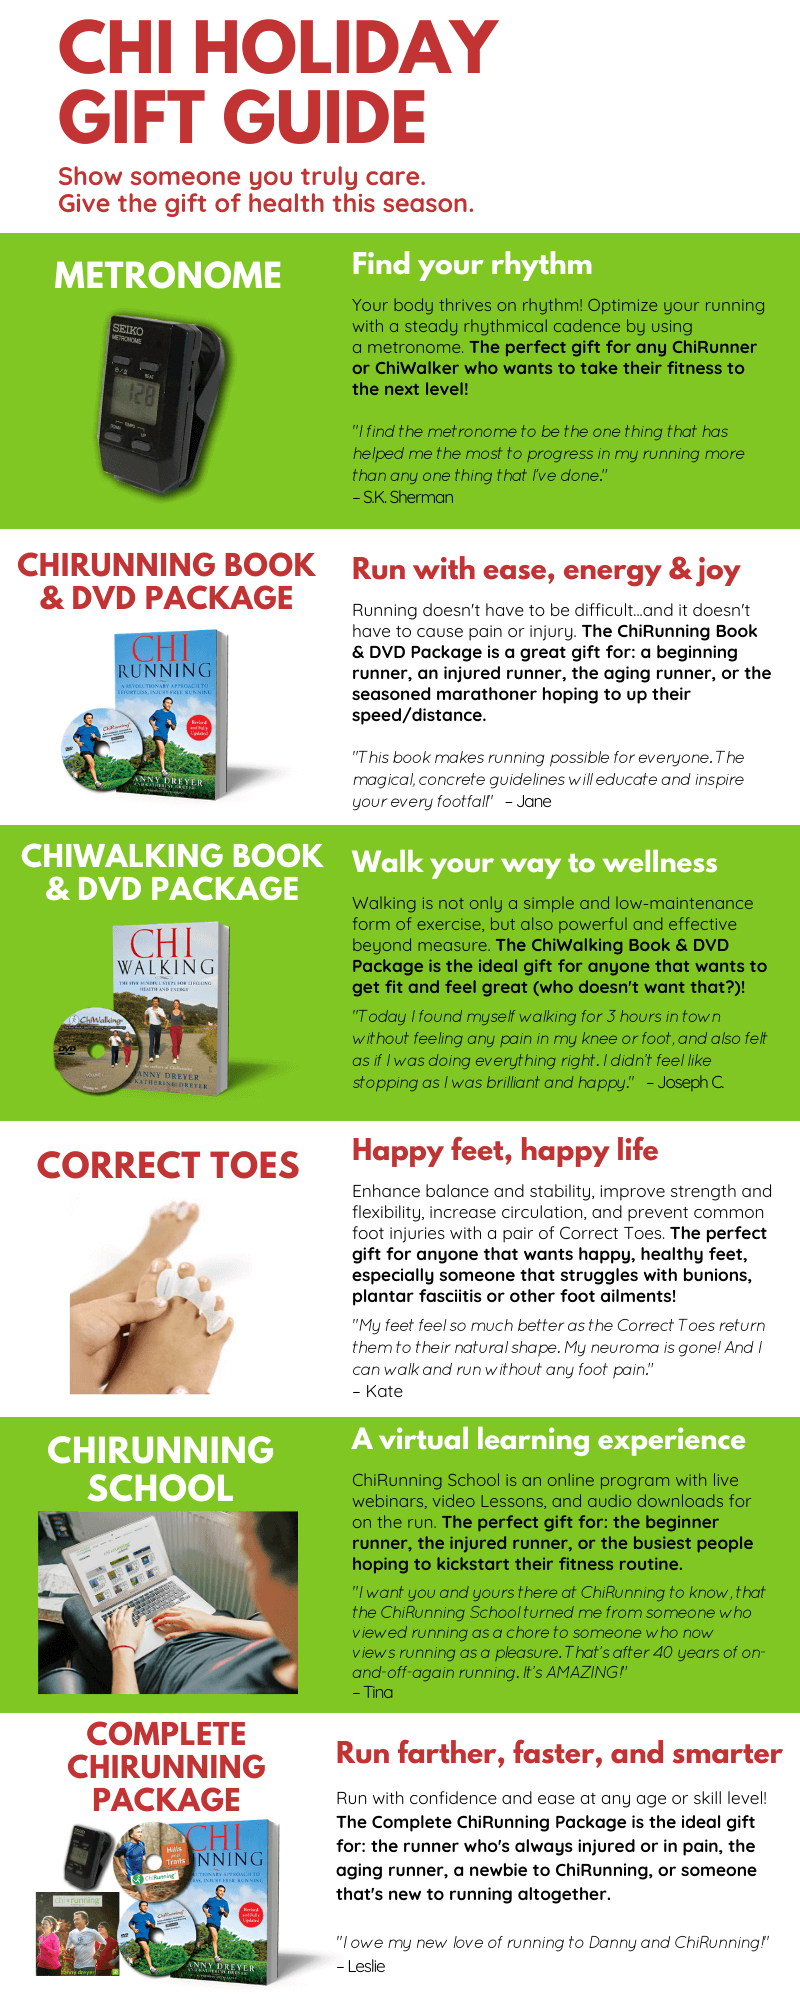 chirunning and chiwalking holiday gift guide: metronome, chirunning book and dvd package, chiwalking book and dvd package, correct toes, chirunning school, complete chirunning package